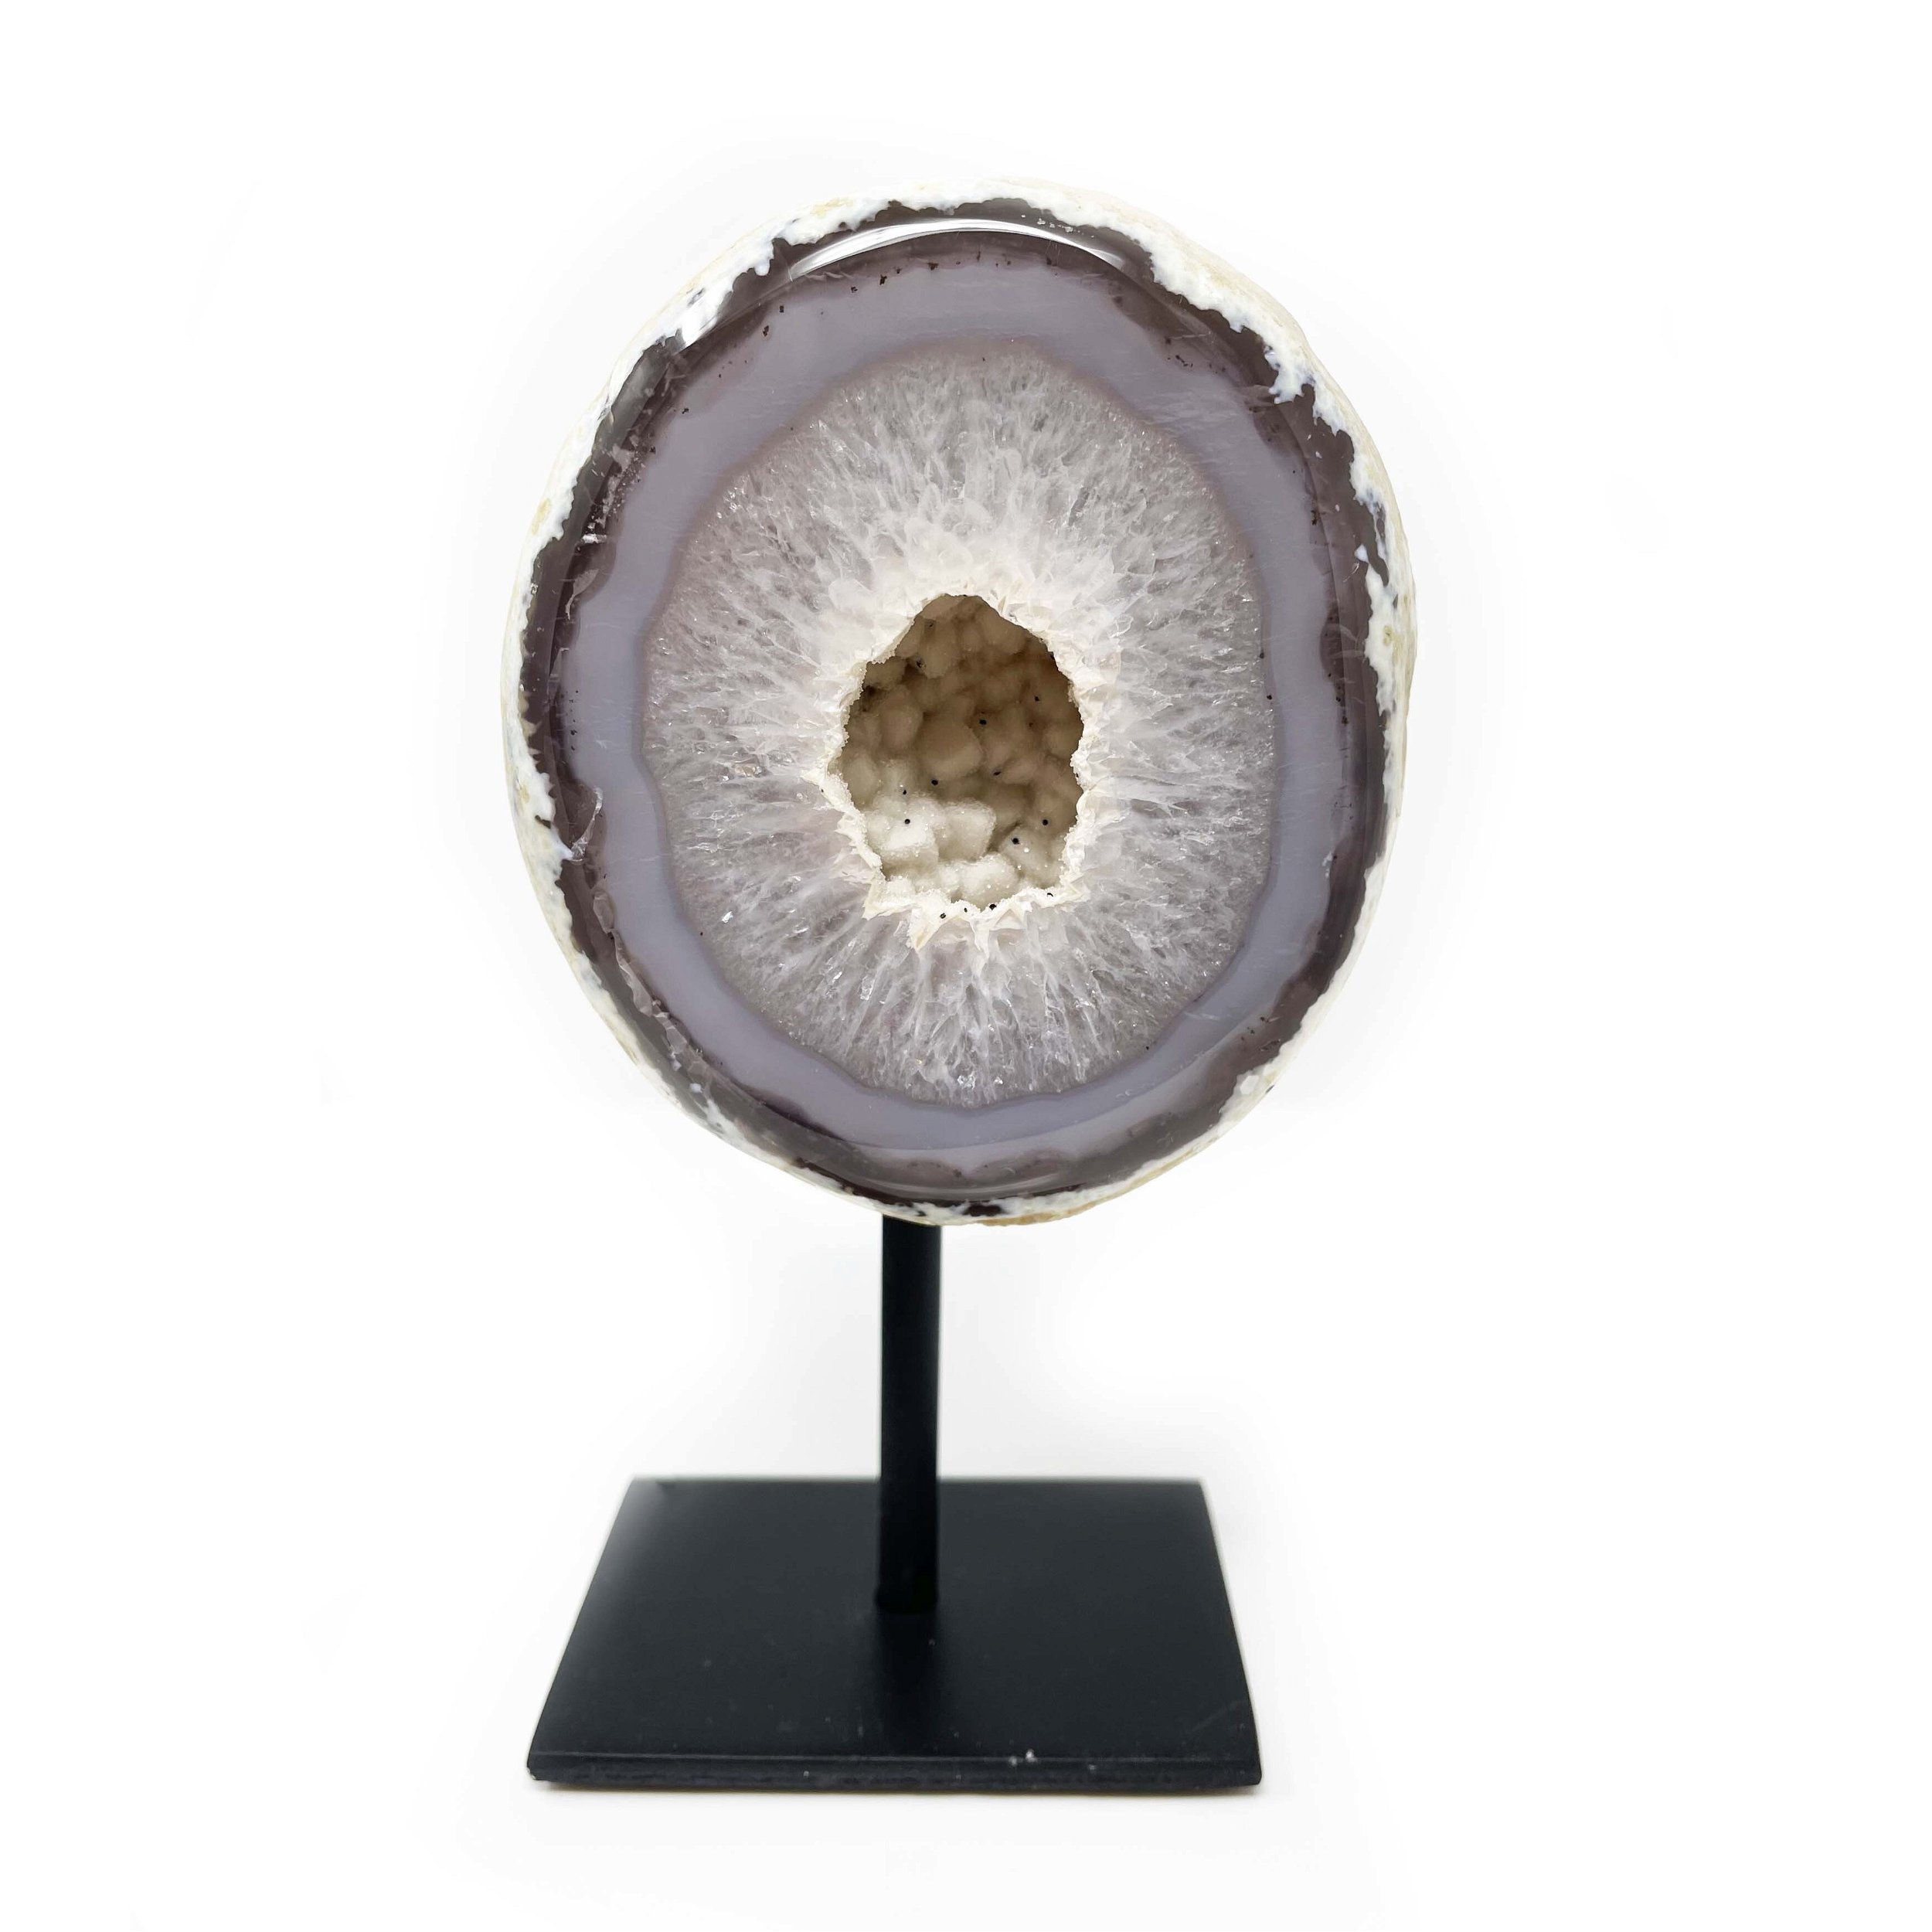 Druze Geode On Post Stand - White Agate With Gray Banding And Druze Center With Black Flakes